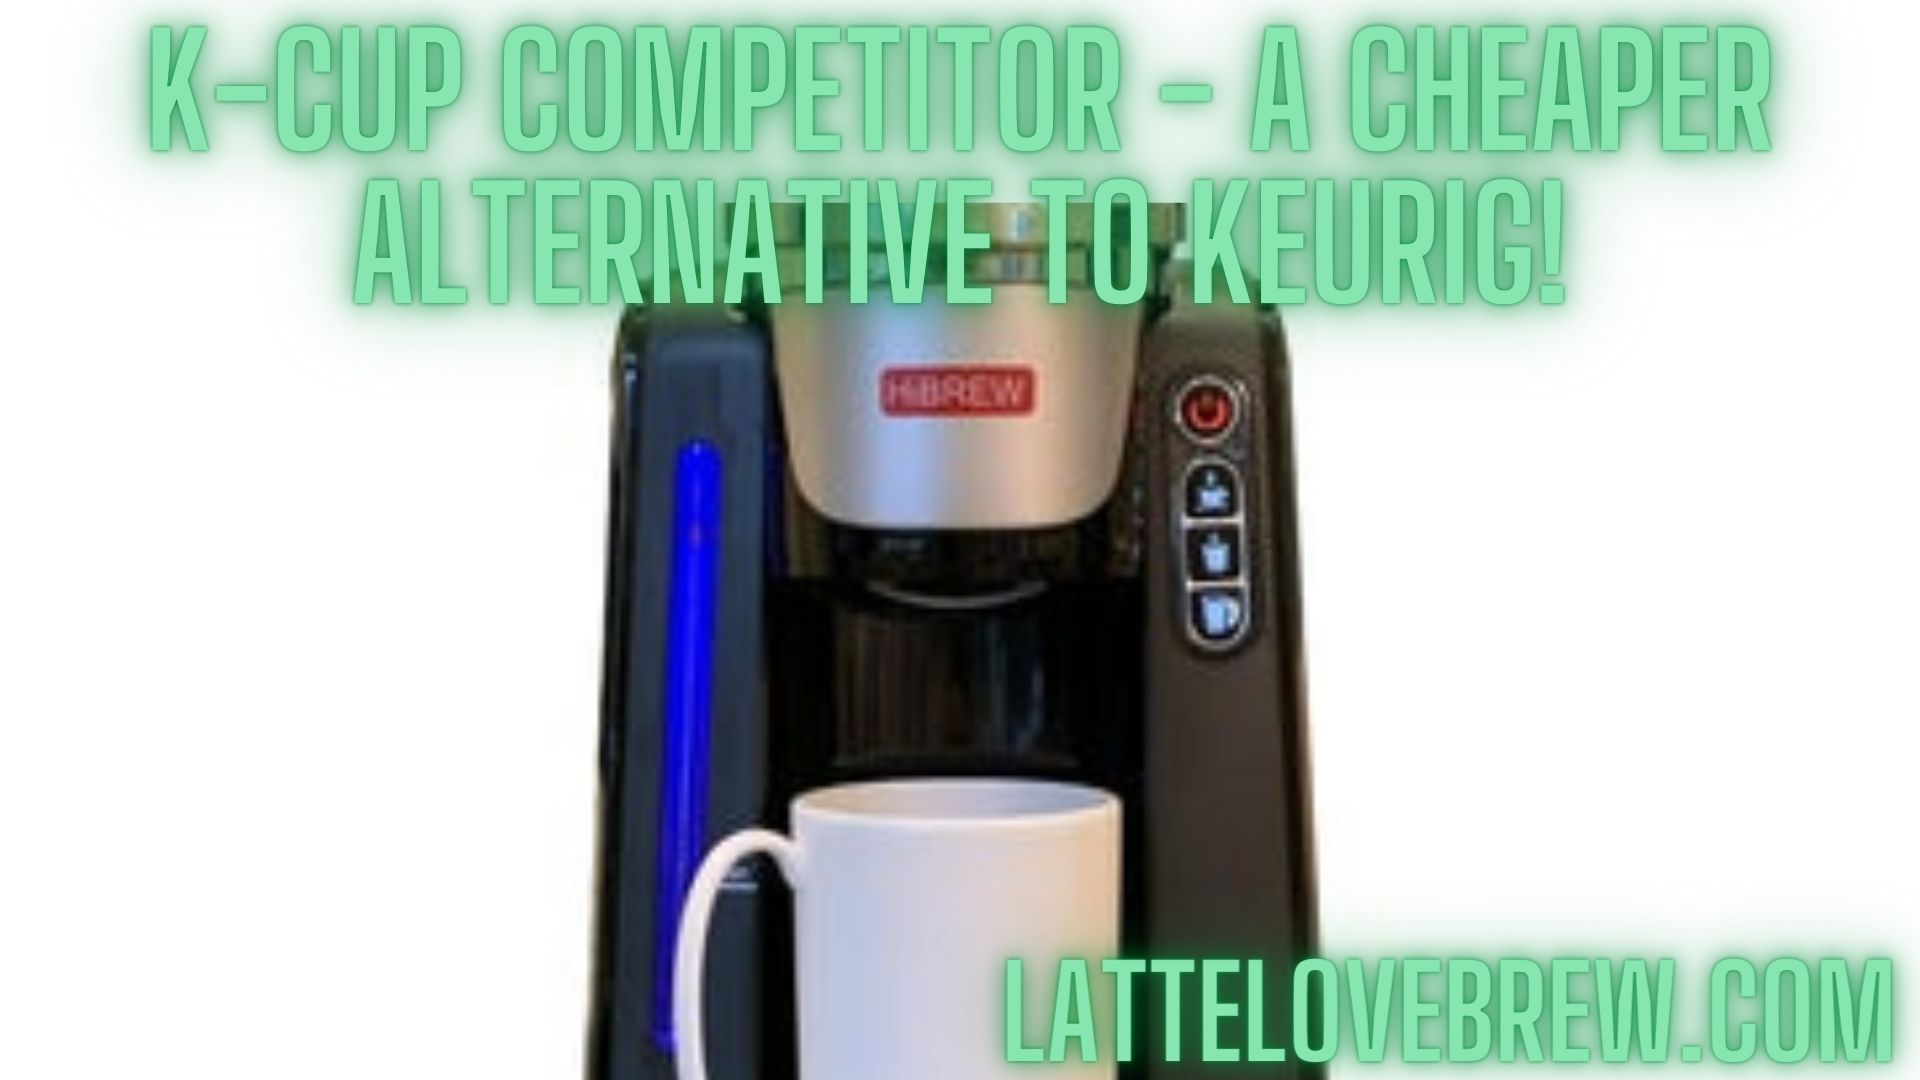 K-Cup Competitor - A Cheaper Alternative To Keurig! - Latte Love